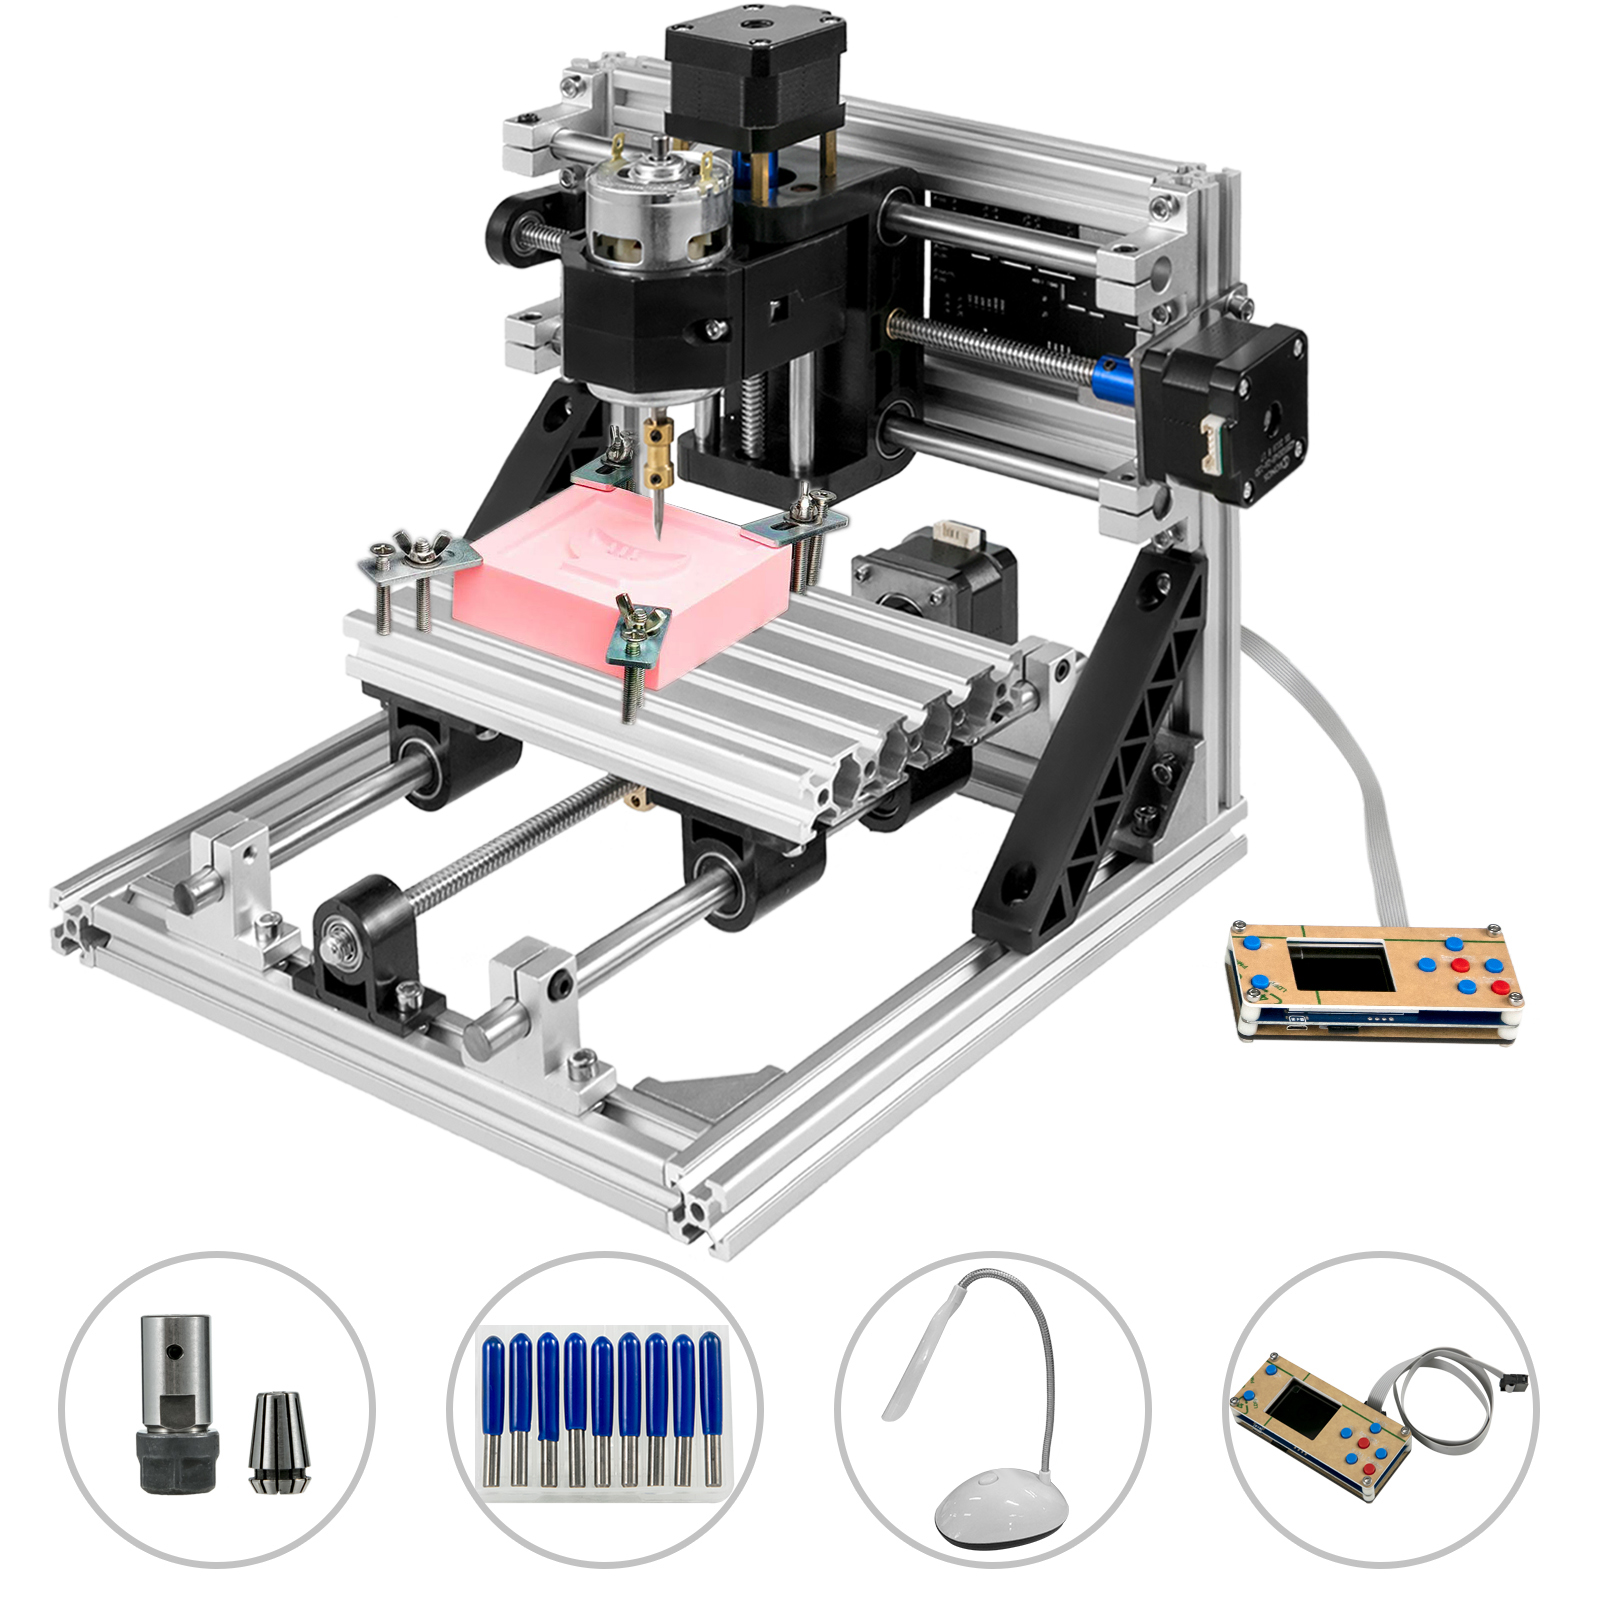 3 Axis Cnc Router 2418 With Offline Controller Engraving Tools Grbl For Wood от Vevor Many GEOs